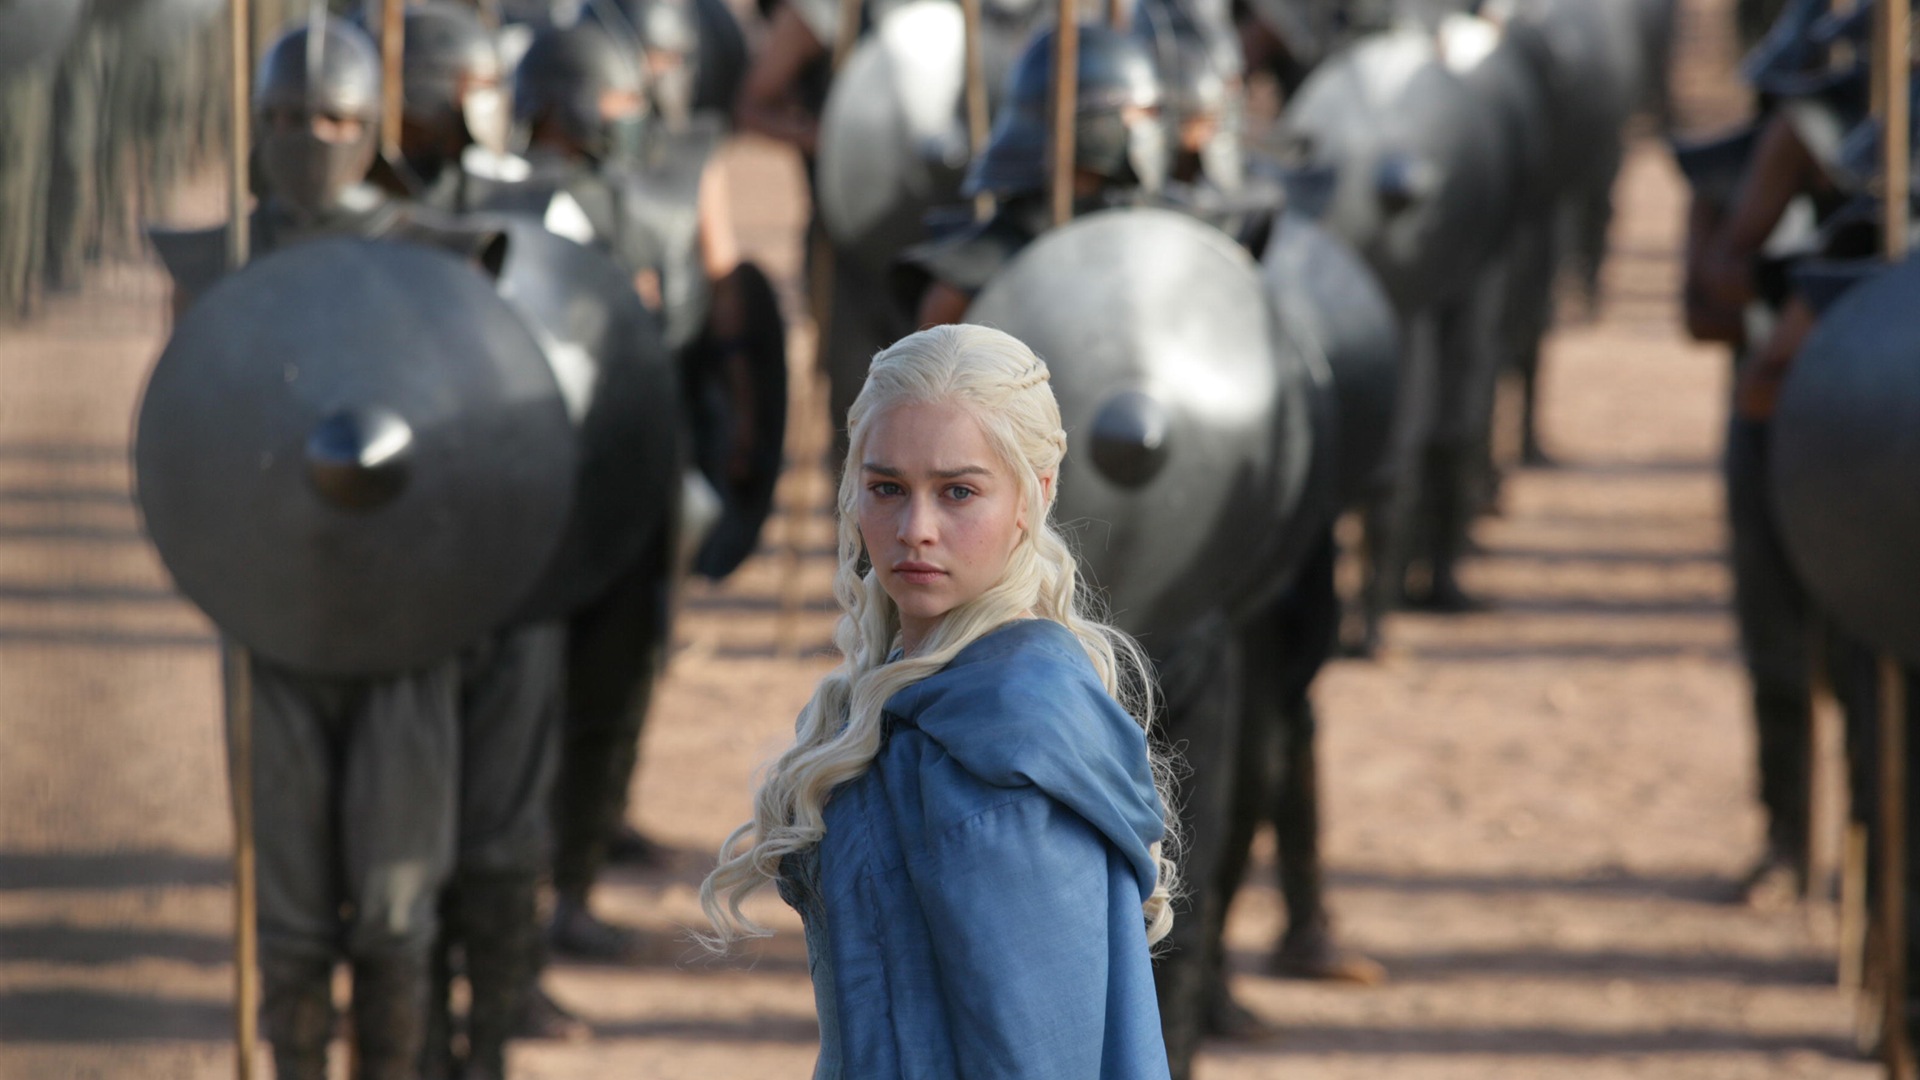 A Song of Ice and Fire: Game of Thrones HD Wallpaper #44 - 1920x1080